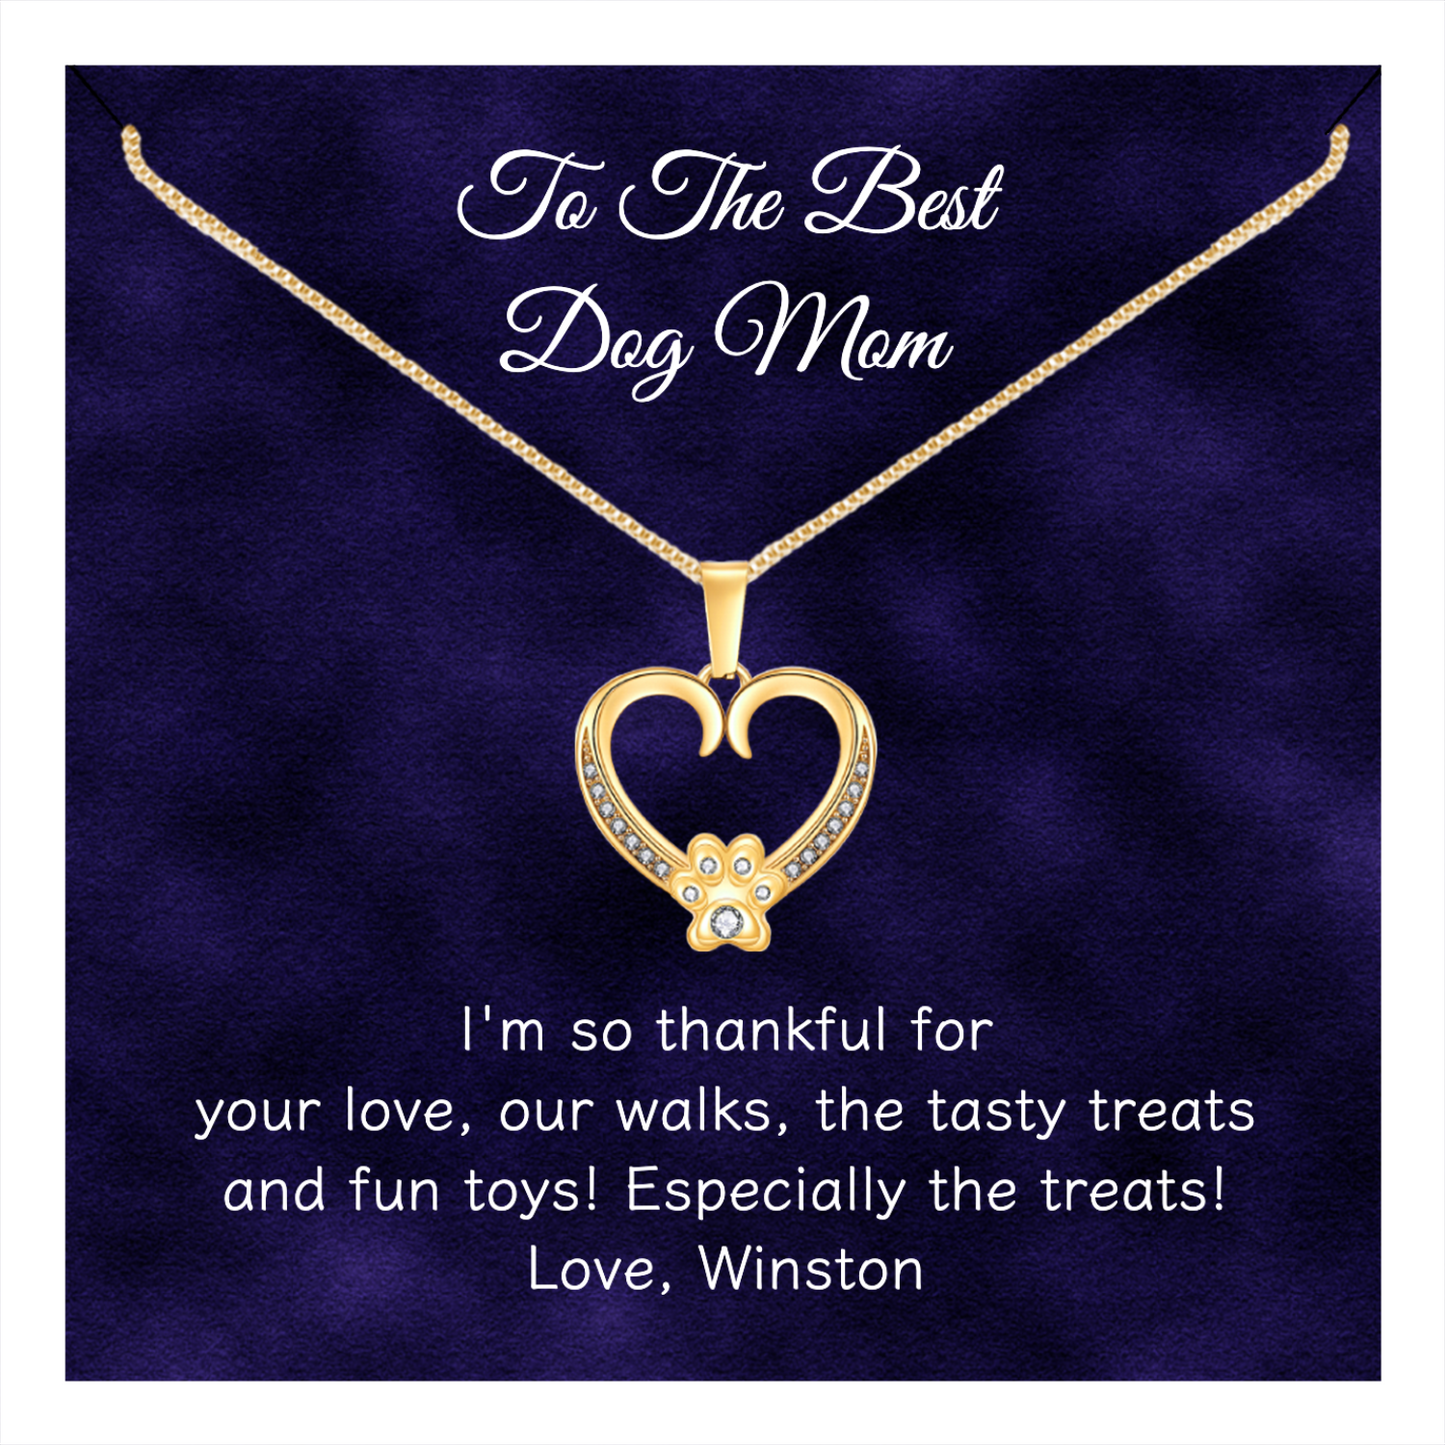 Heart & Paw Print Necklace: A Personalized Token of Love - PuppyJo 24k Gold Paw Heart with Message Card